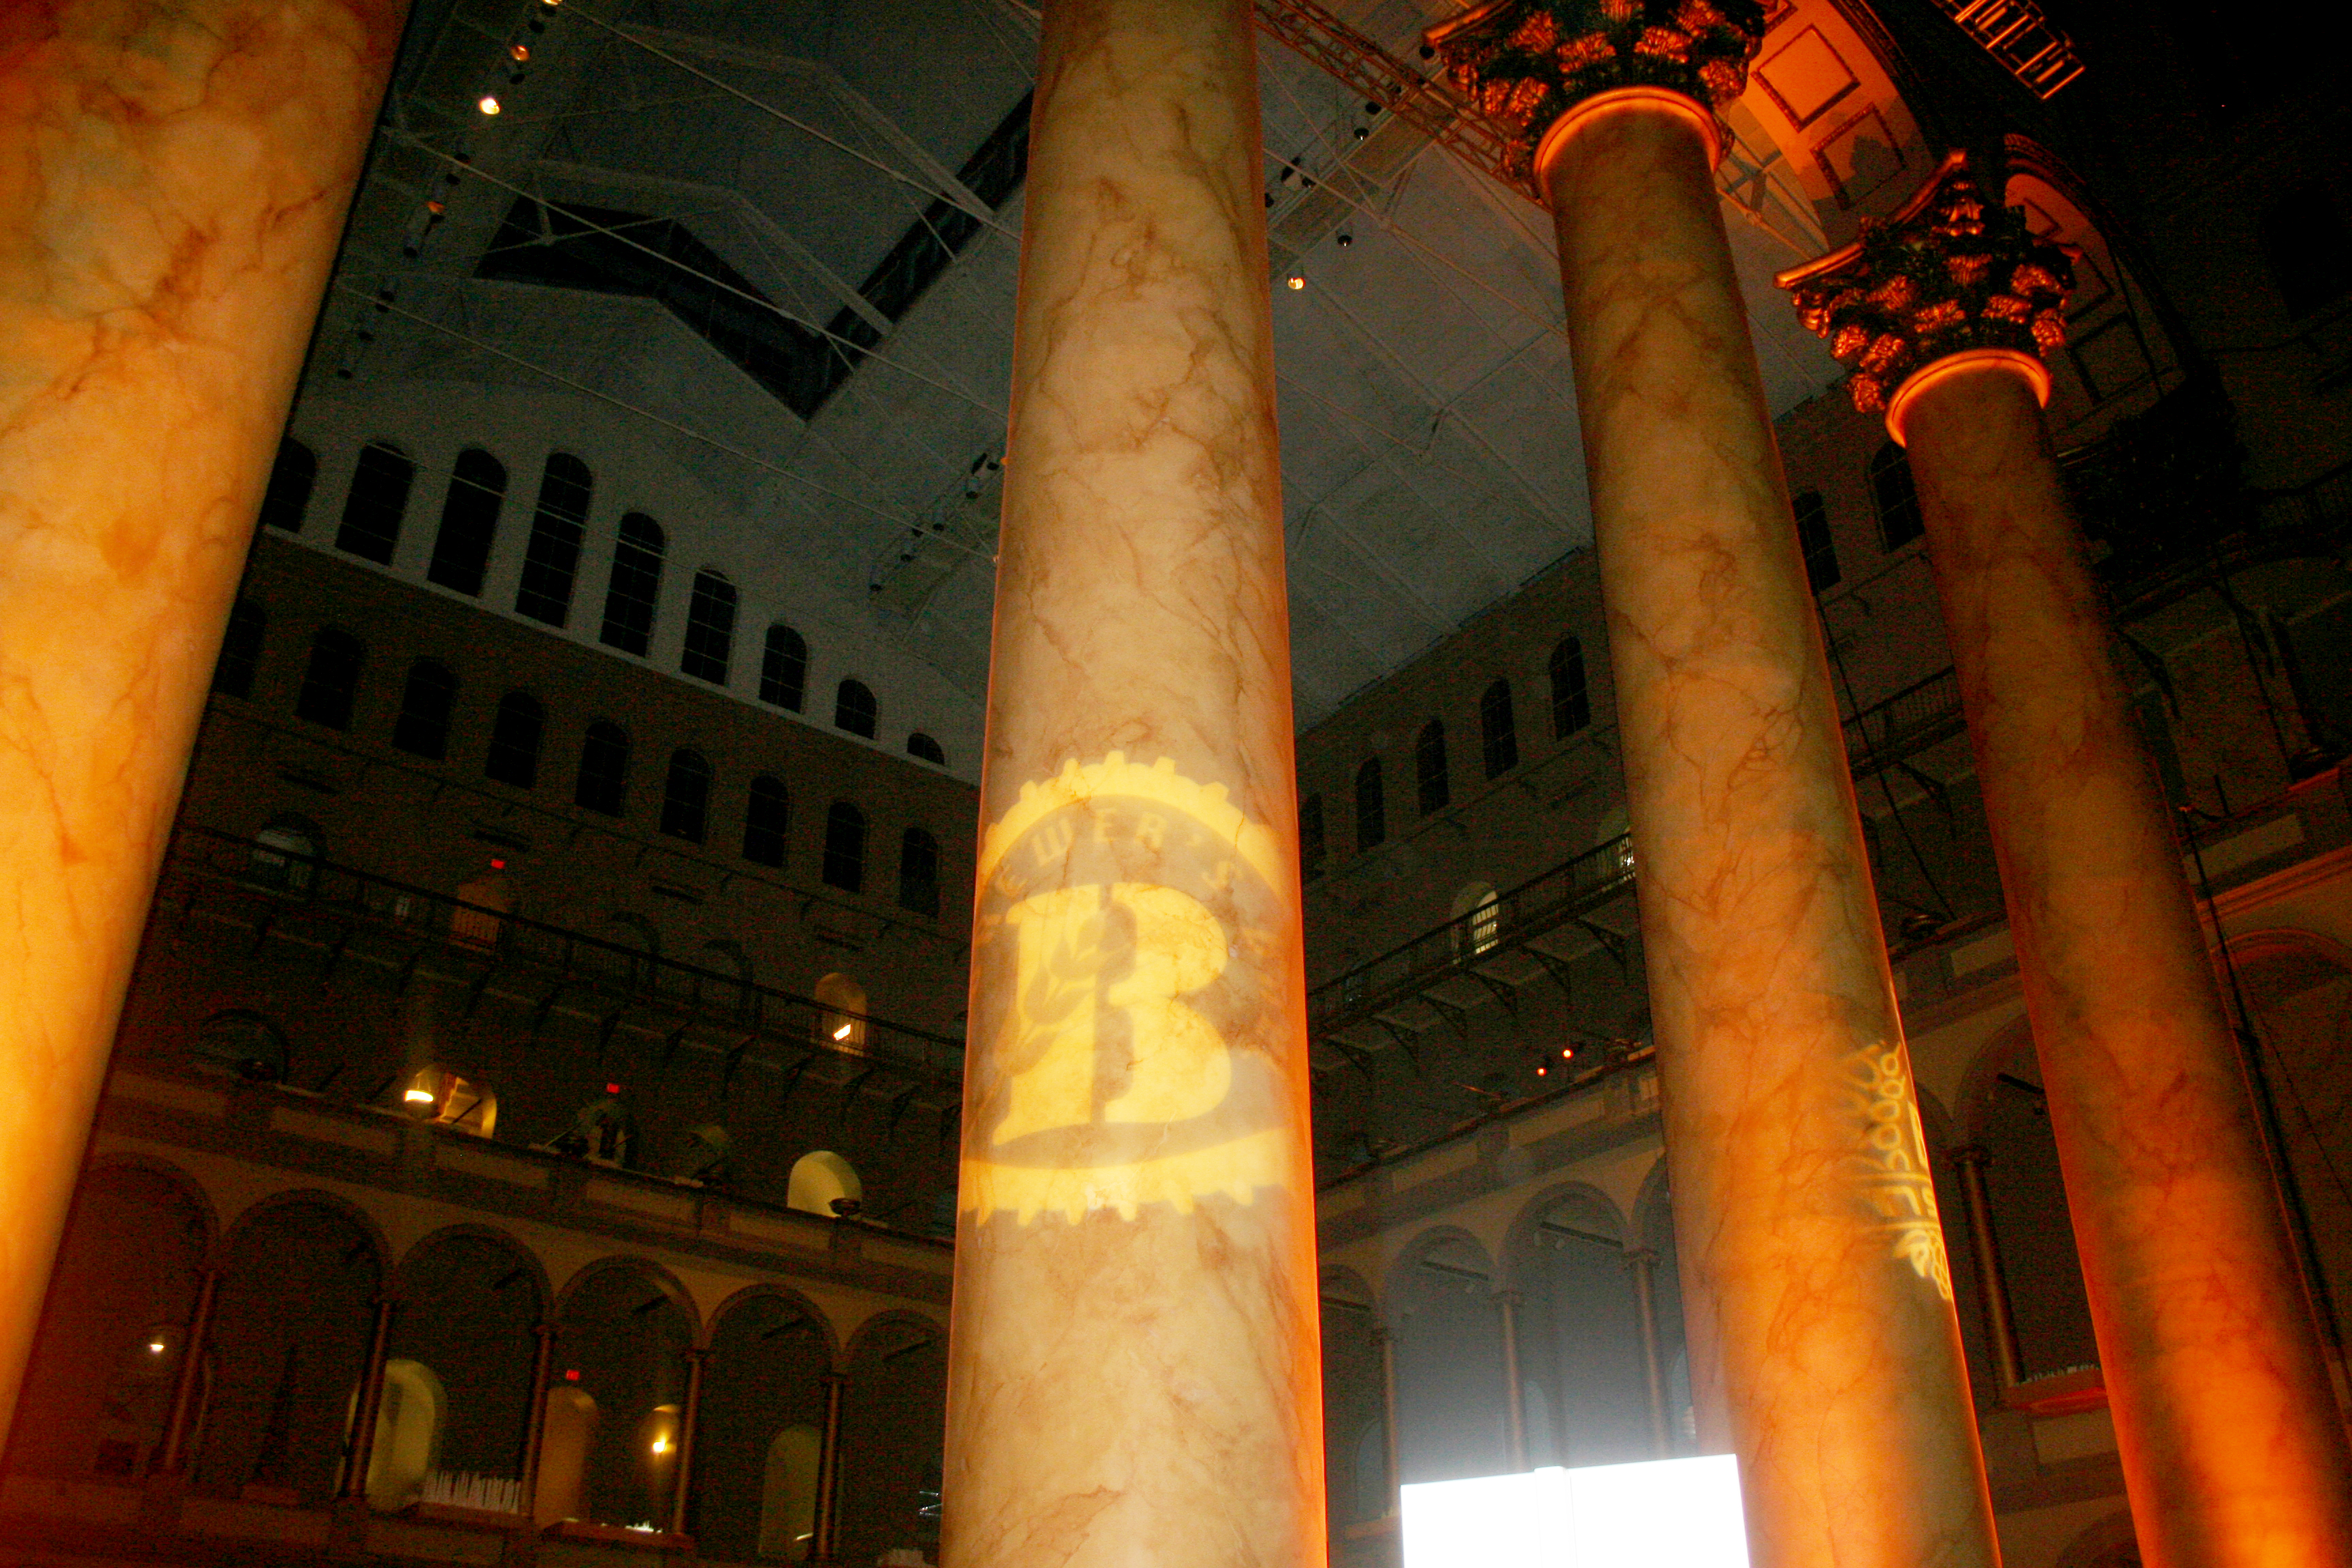 The Cystic Fibrosis Foundation's Brewer's Ball was at the National Building Museum on Saturday. (Photo: Mark Heckathorn)